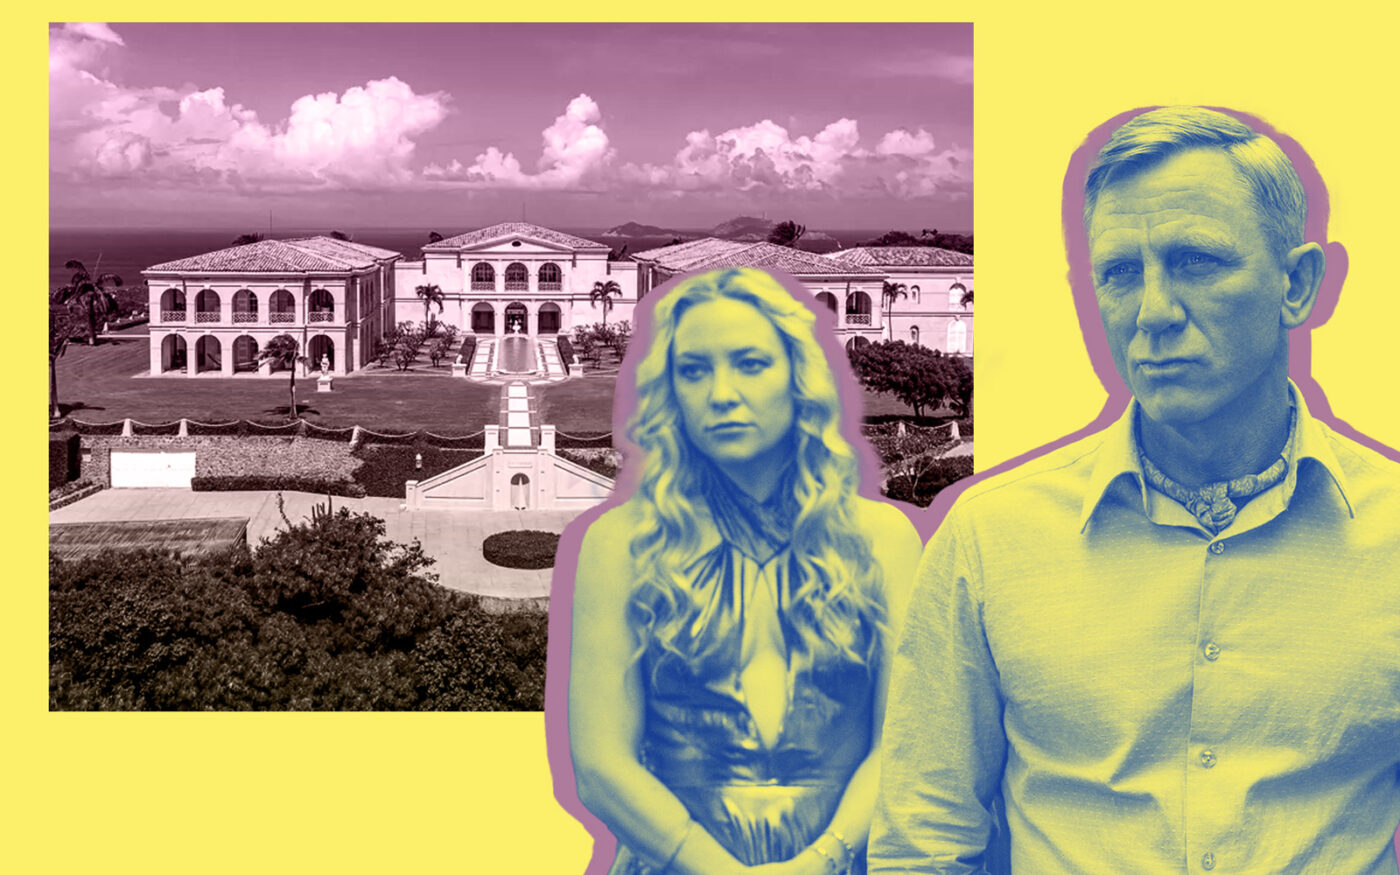 The estate on Mustique in the Caribbean with Kate Hudson and Daniel Craig in "Glass Onion"